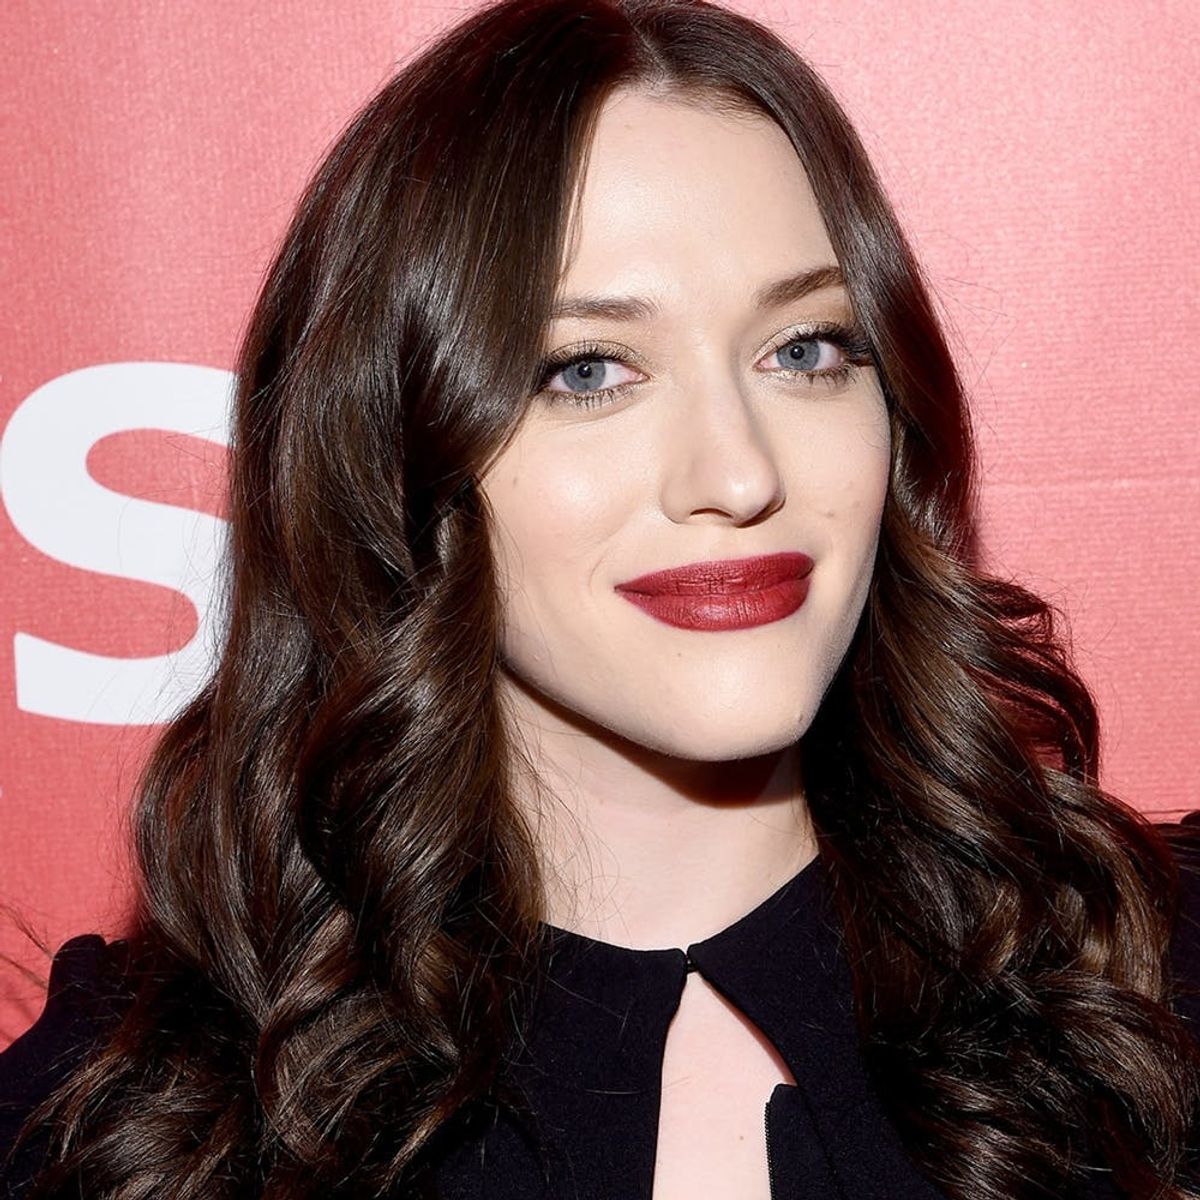 Kat Dennings Tried This Pinterest Hair Hack… and Failed Miserably